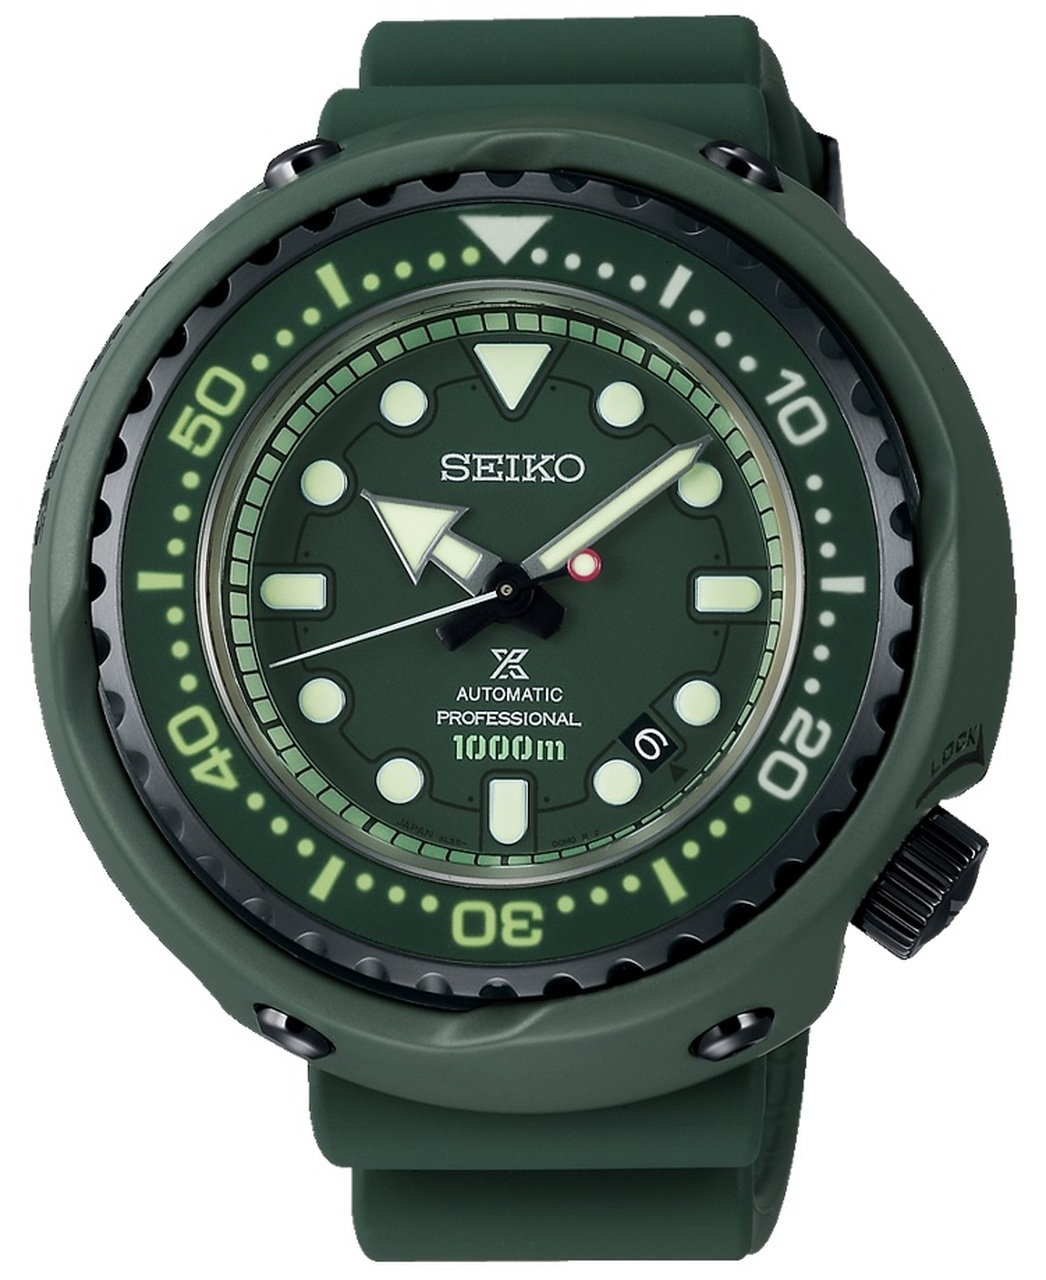 Find Your Perfect Green Watch from These Seiko Watches - Shopping In Japan  NET